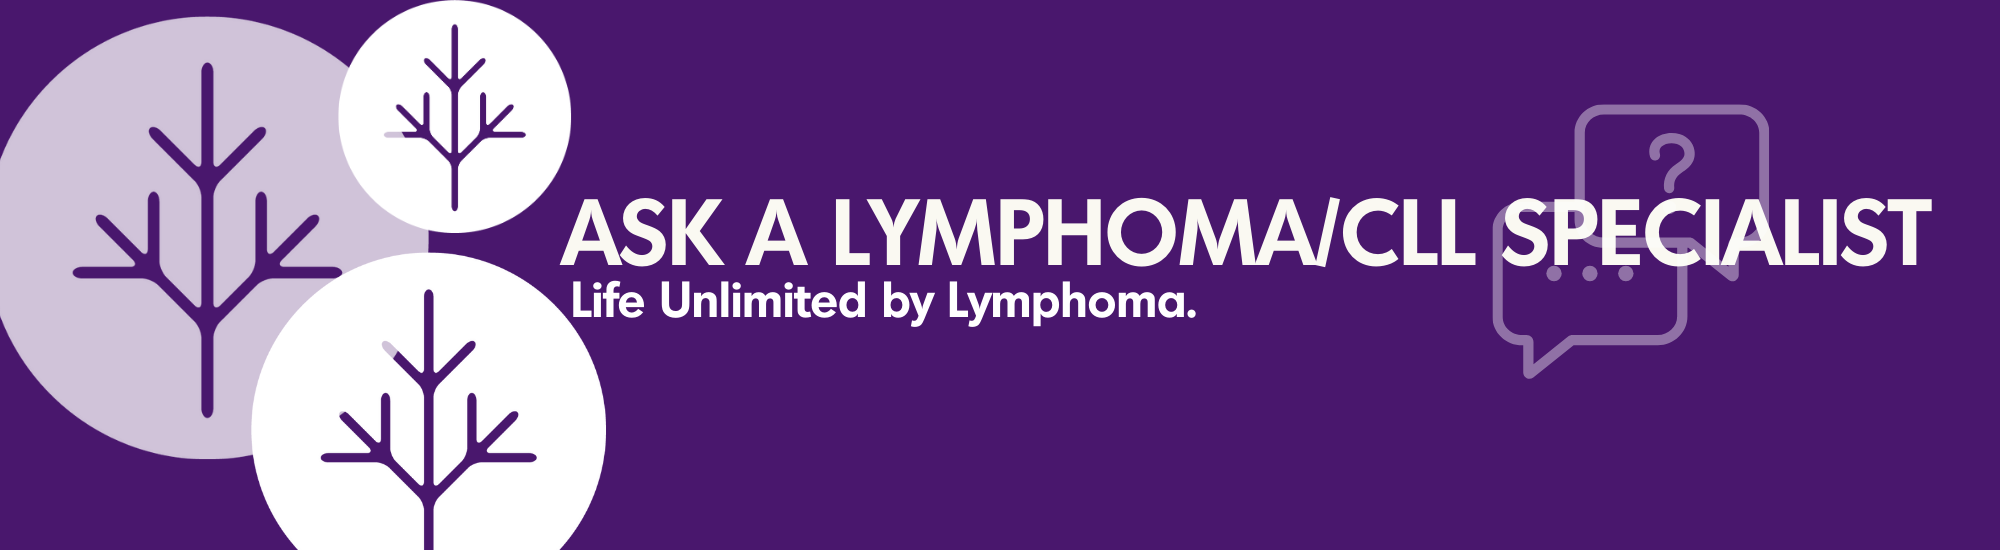 Ask a Lymphoma/ CLL Specialist